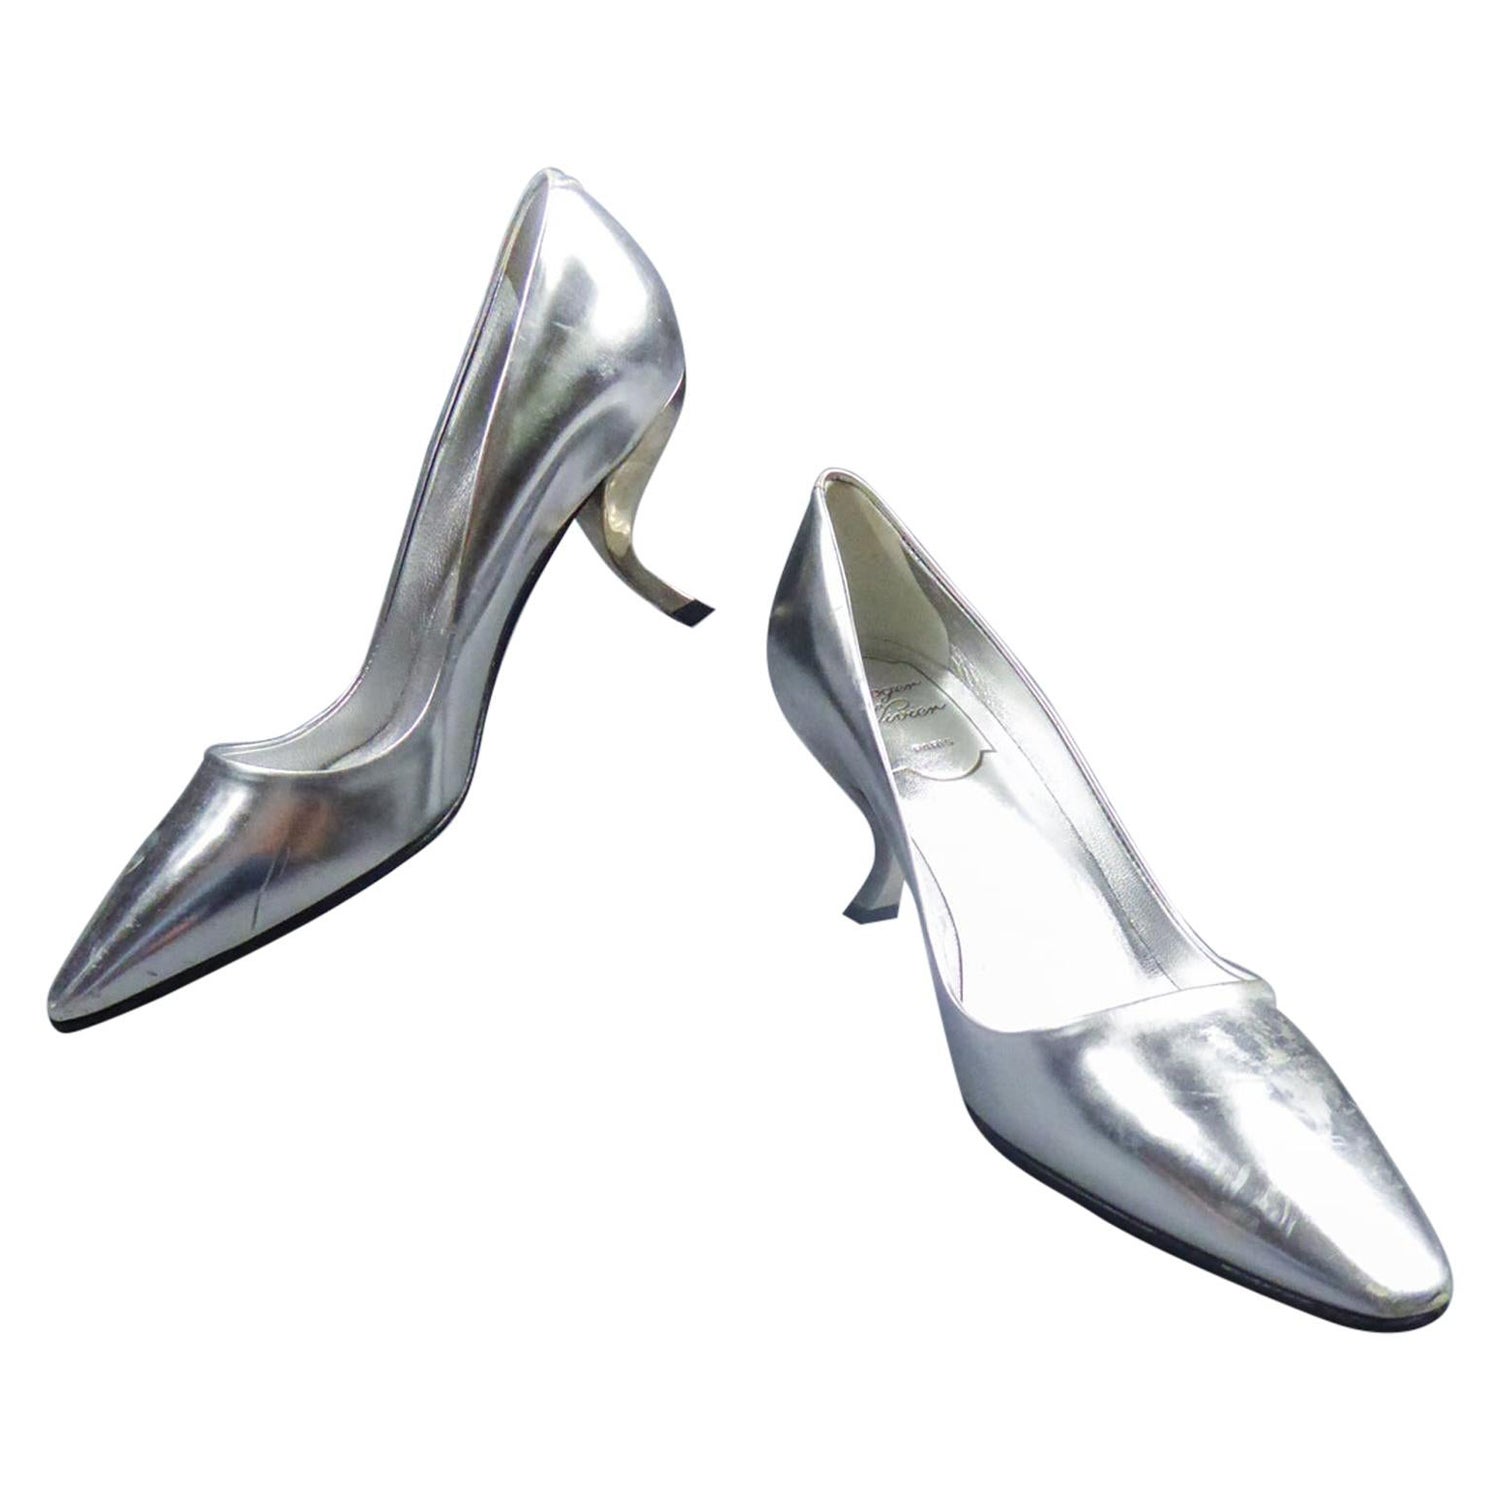 Iconic Pair of Roger Vivier Pumps with Virgule Heel Circa 1980 For Sale